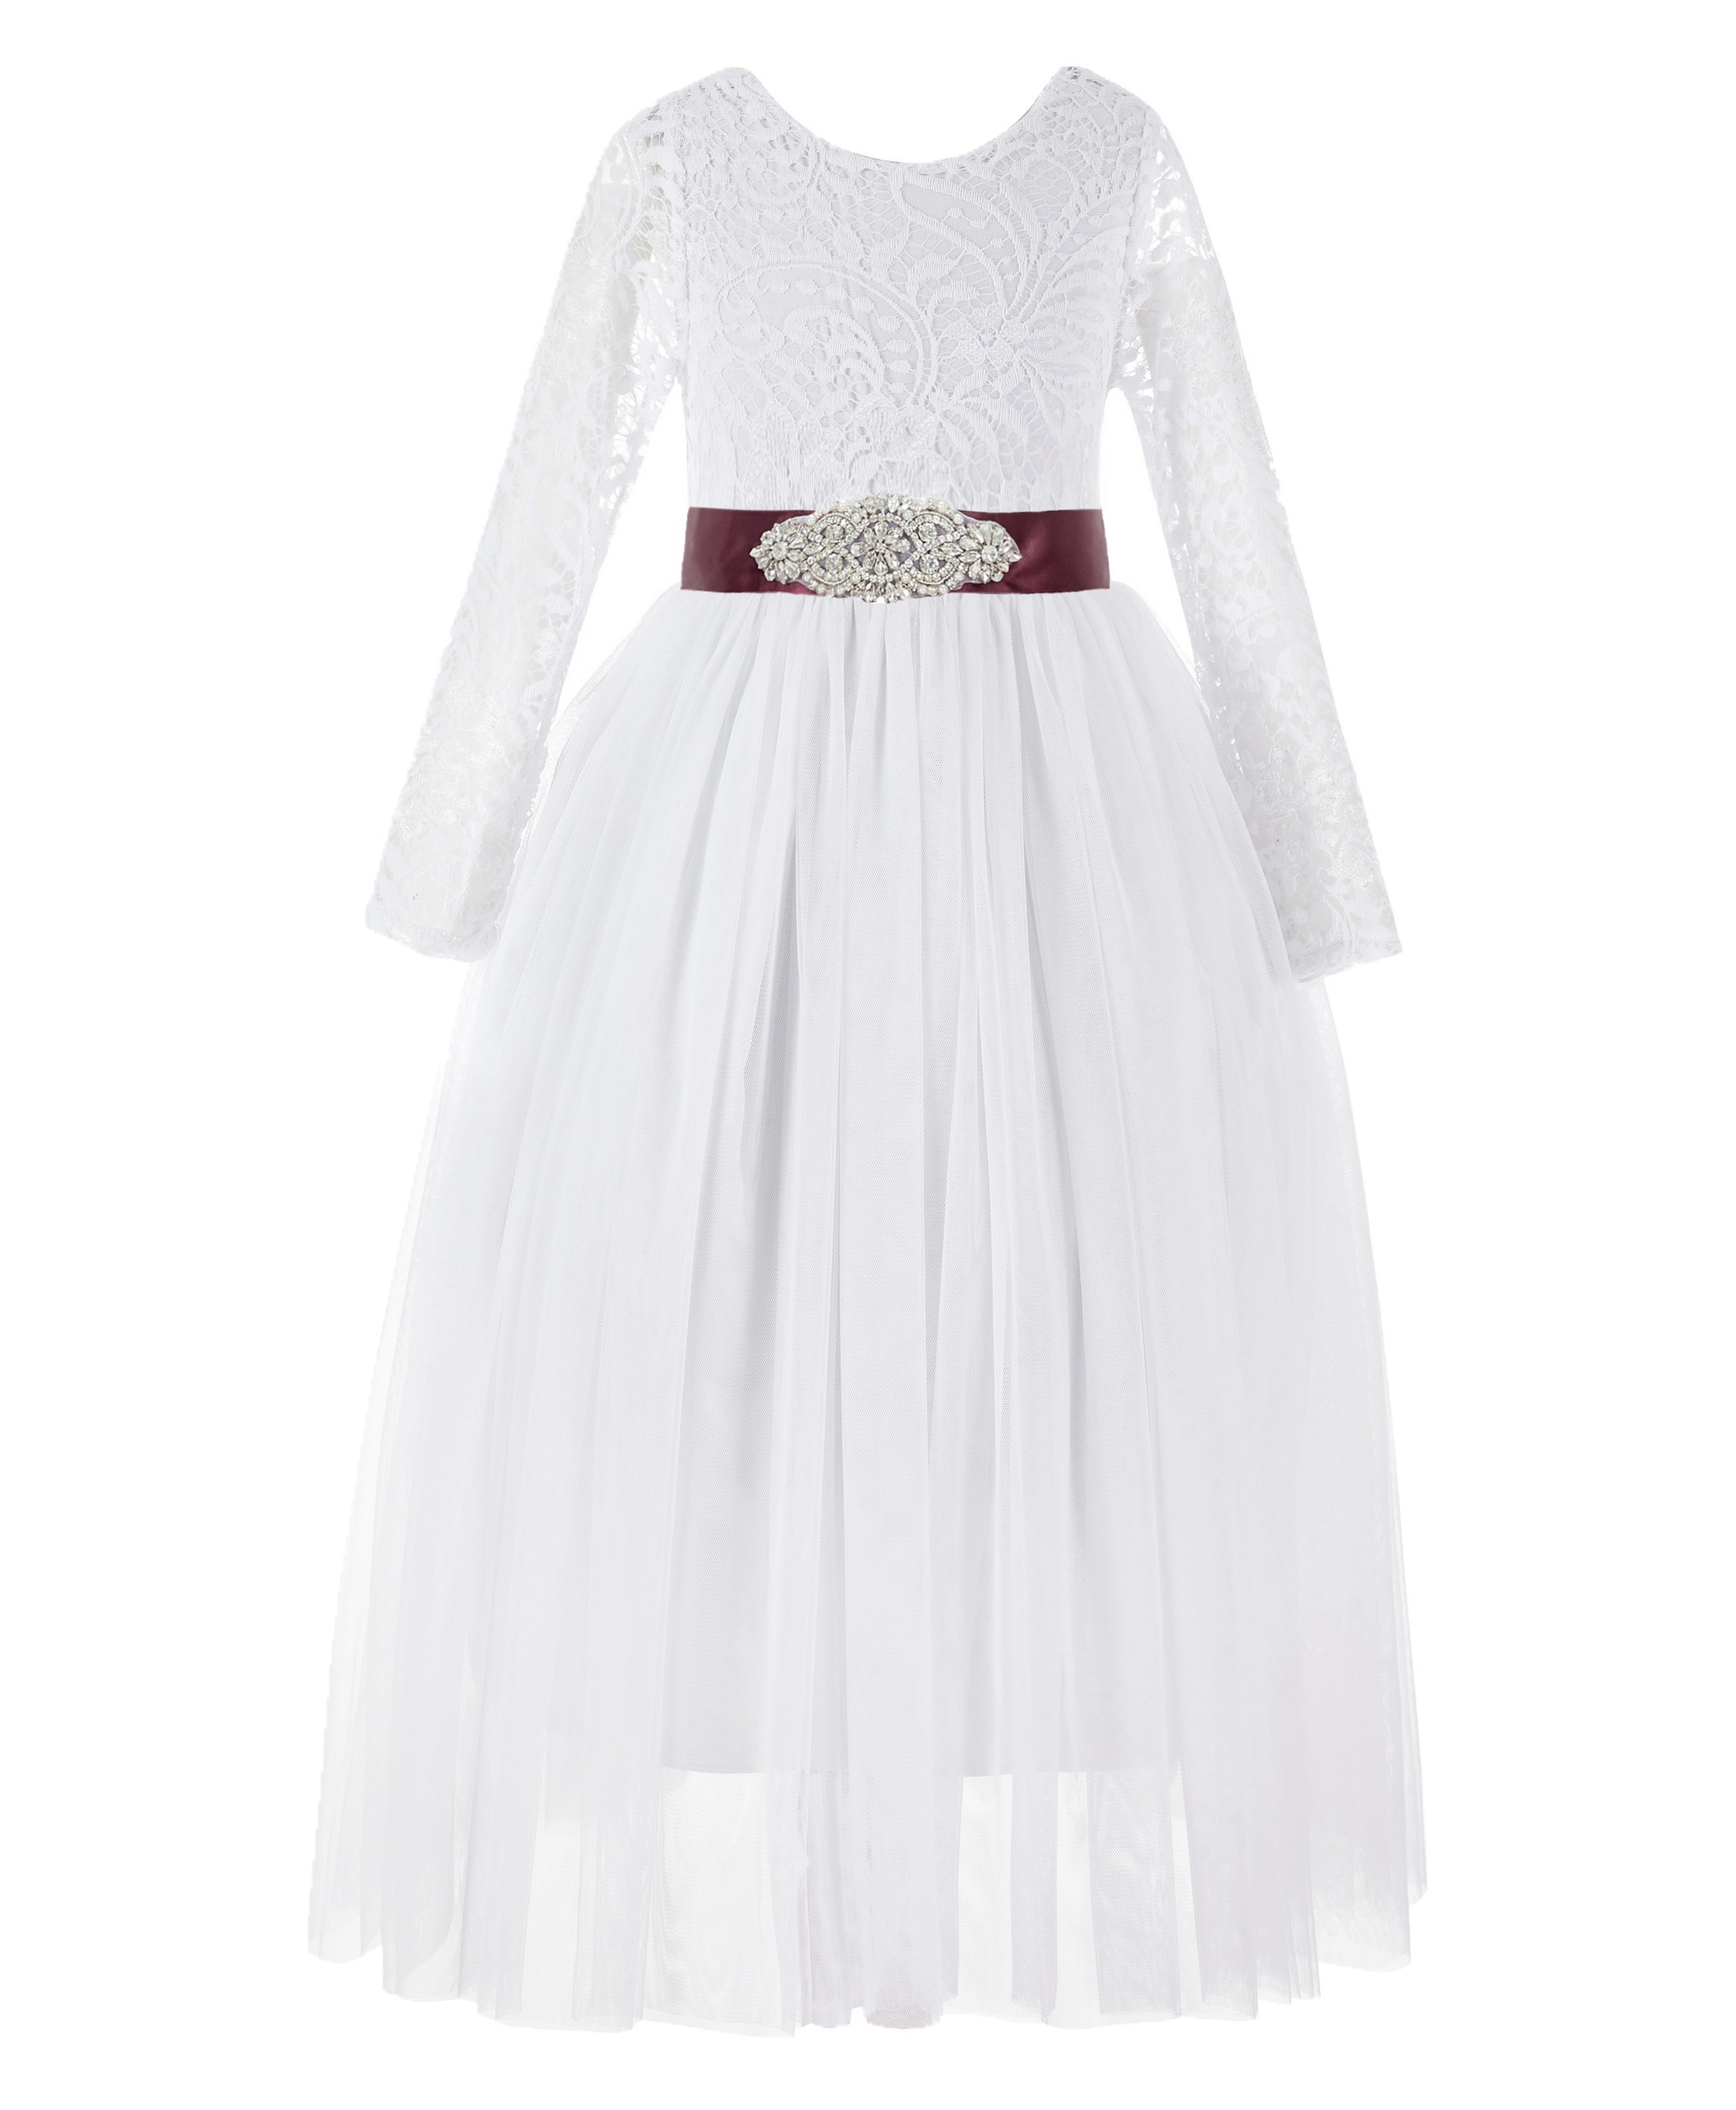 White / Burgundy A-Line V-Back Lace Flower Girl Dress with Sleeves 290R3